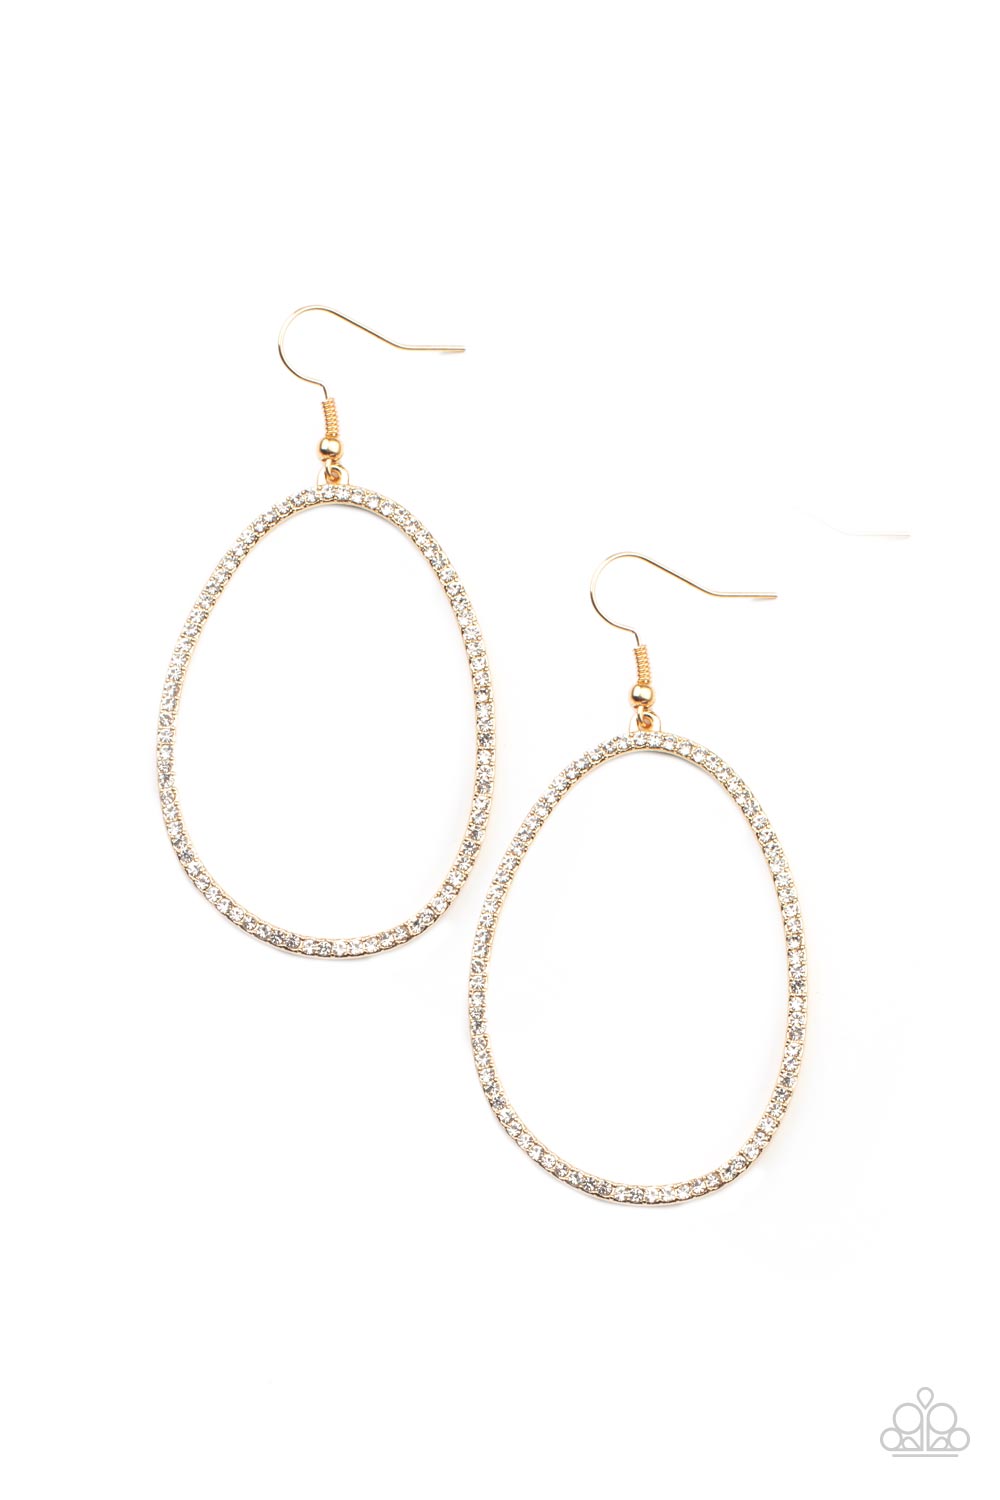 OVAL-ruled! - Gold Earrings - Paparazzi Accessories 